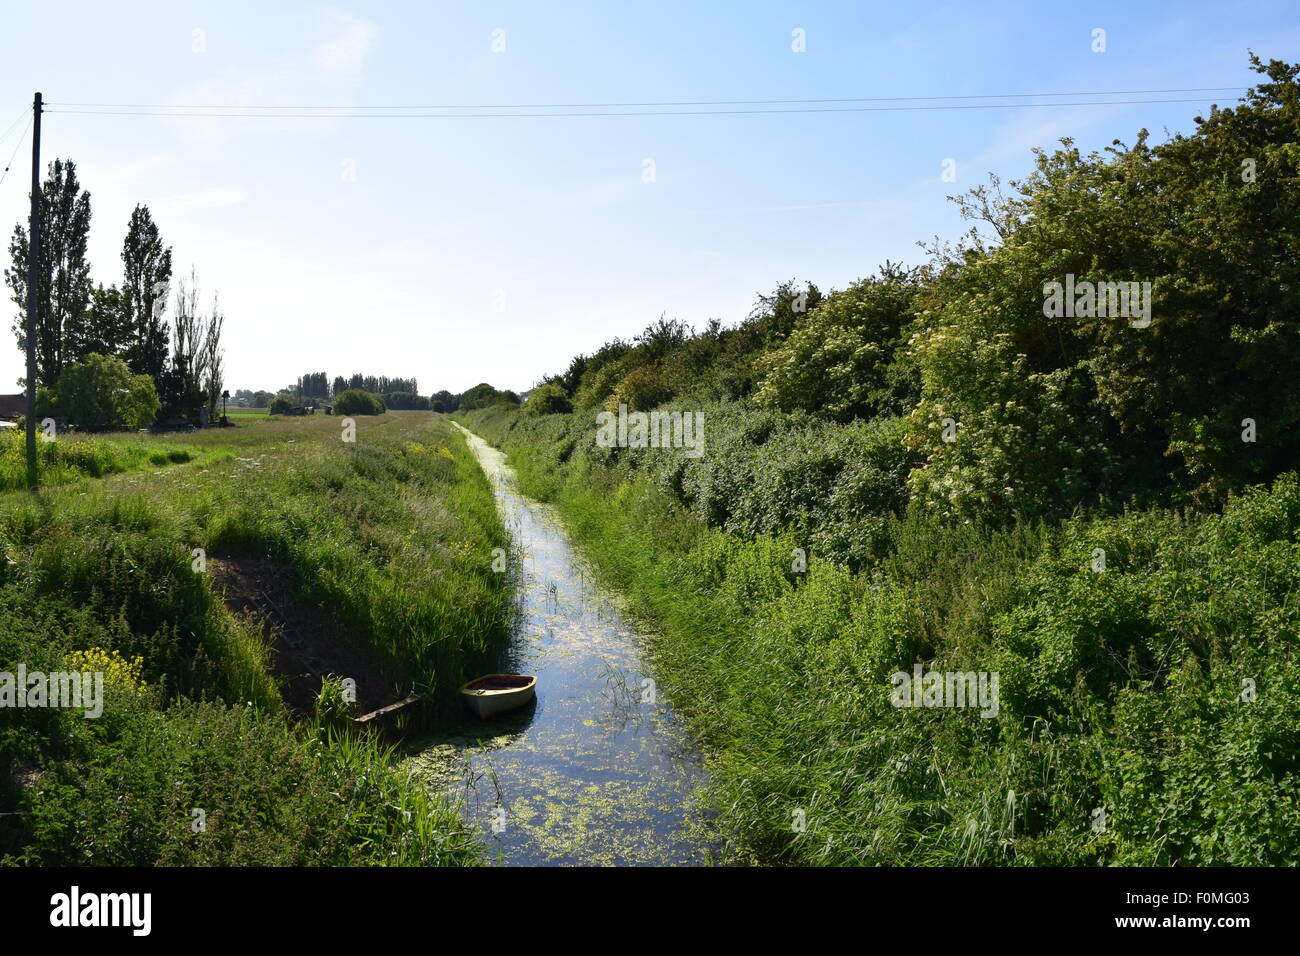 A View of an overgrown dike in Wisbech, Cambridgeshire. Stock Photo